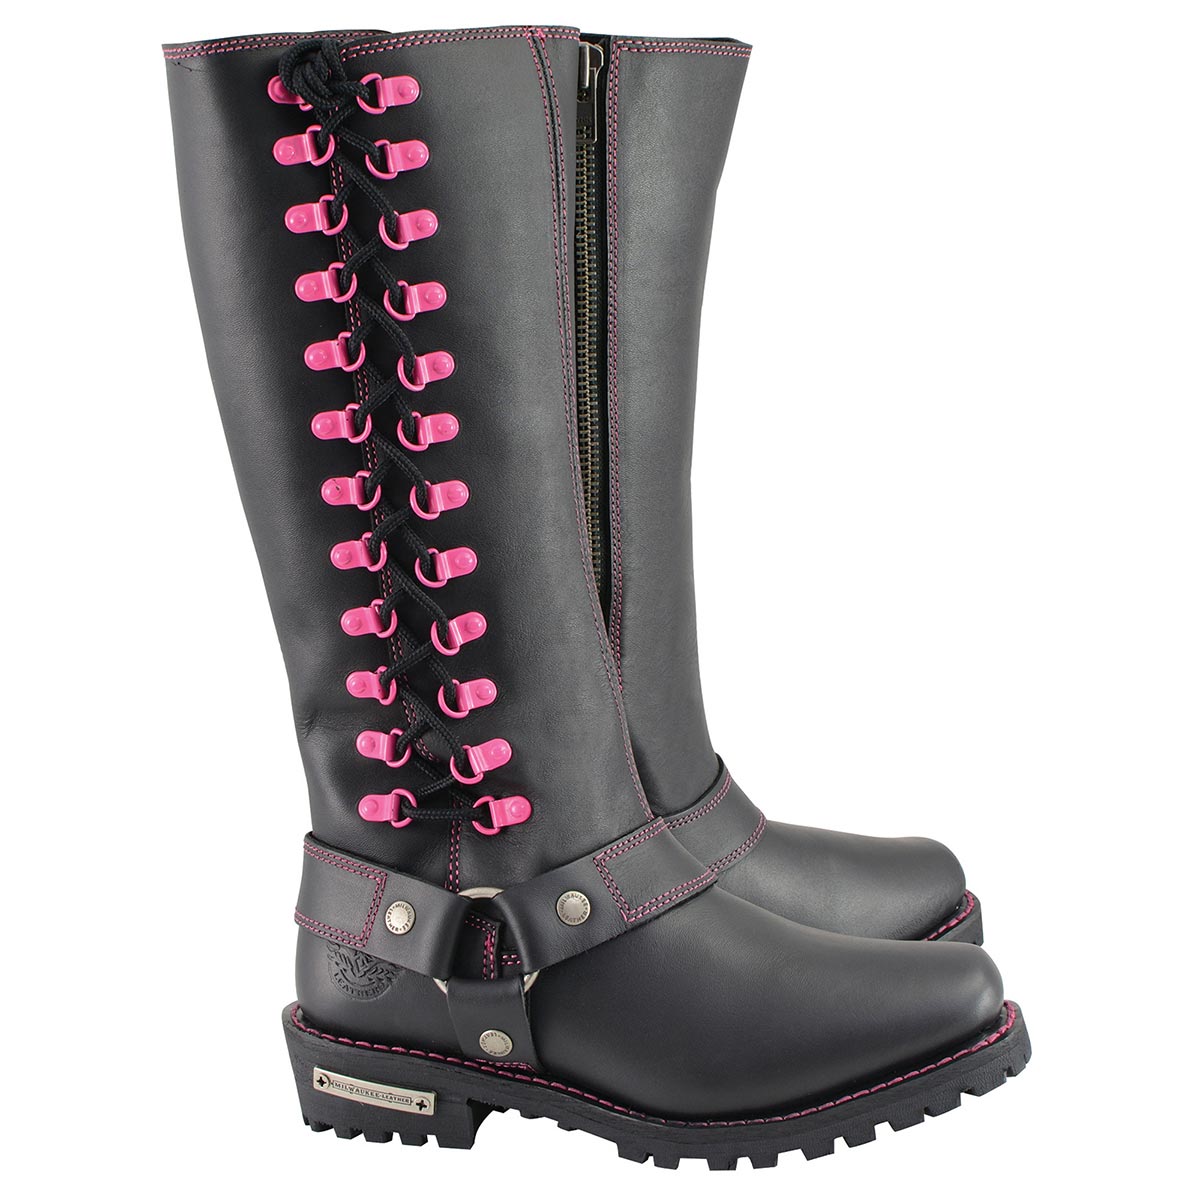 Milwaukee Leather MBL9367 Women's Black 14-inch Leather Harness Boots with Fuchsia Accent Lacing